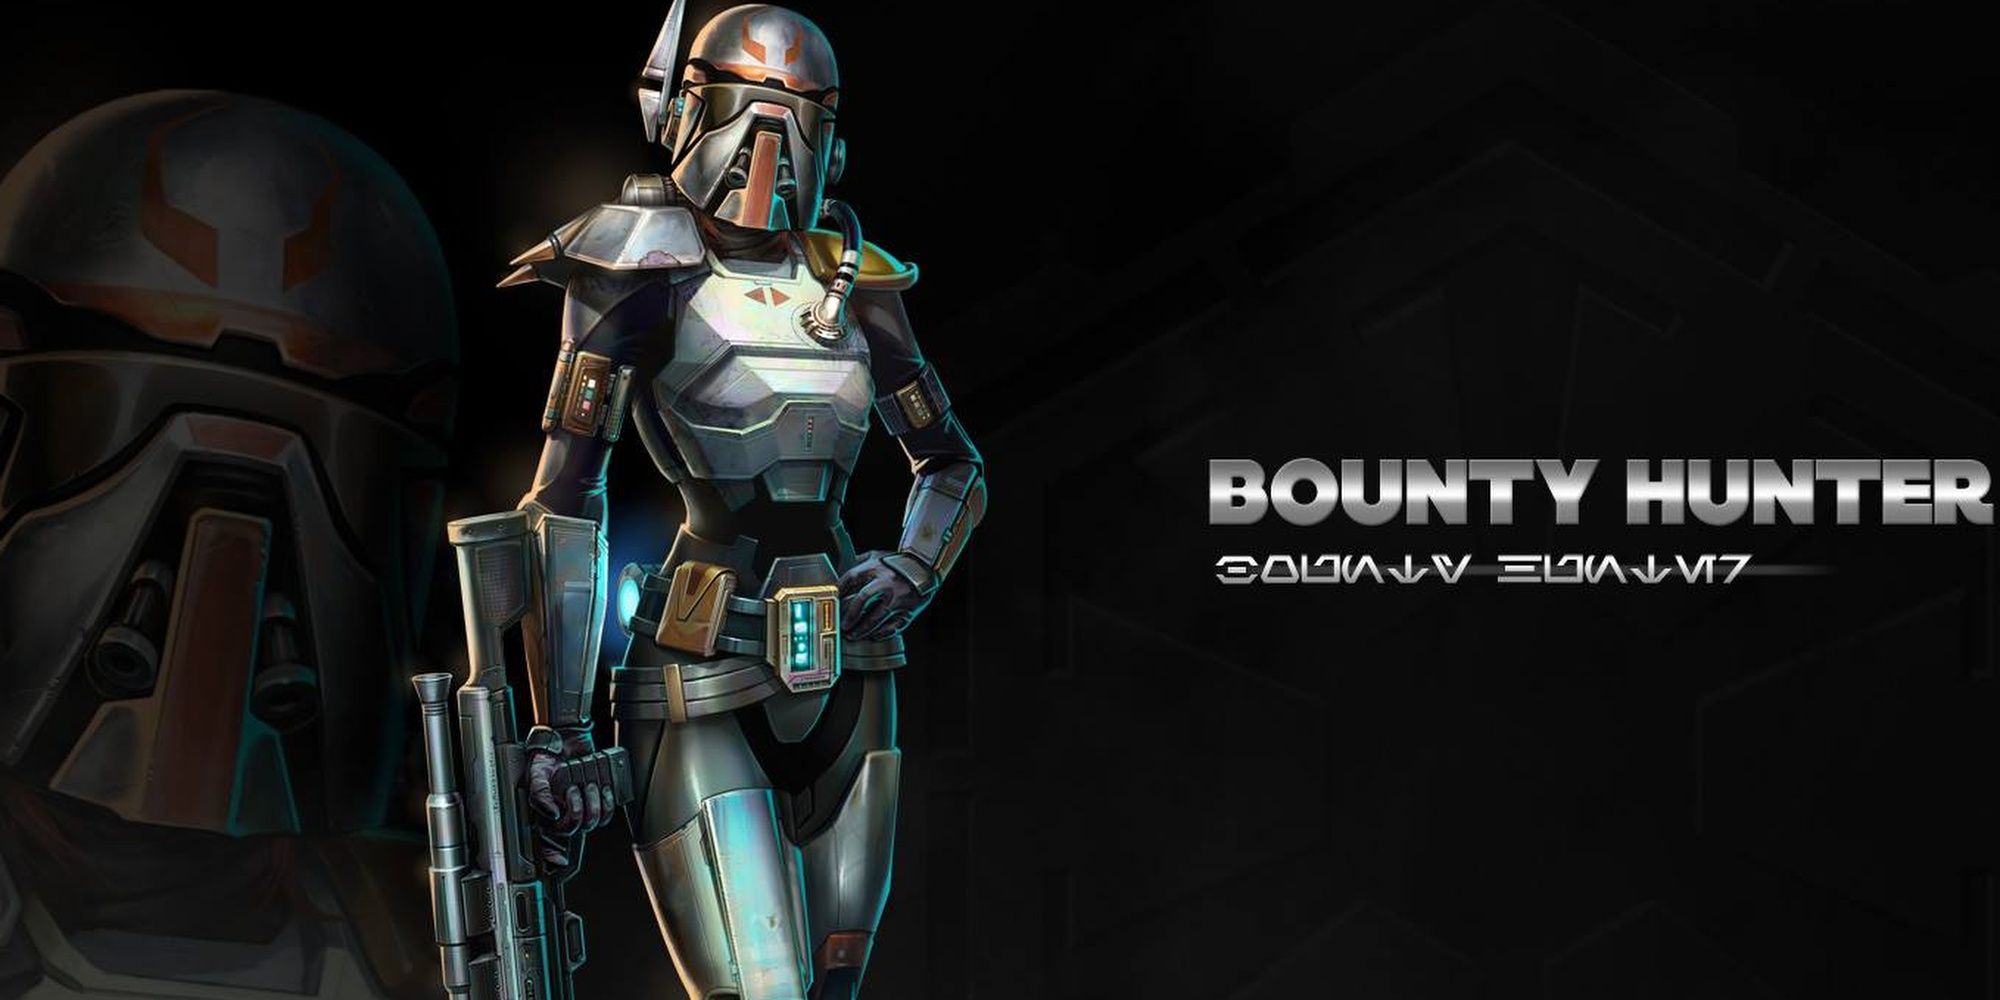 Bounty Hunter from Star Wars: The Old Republic Wallpaper